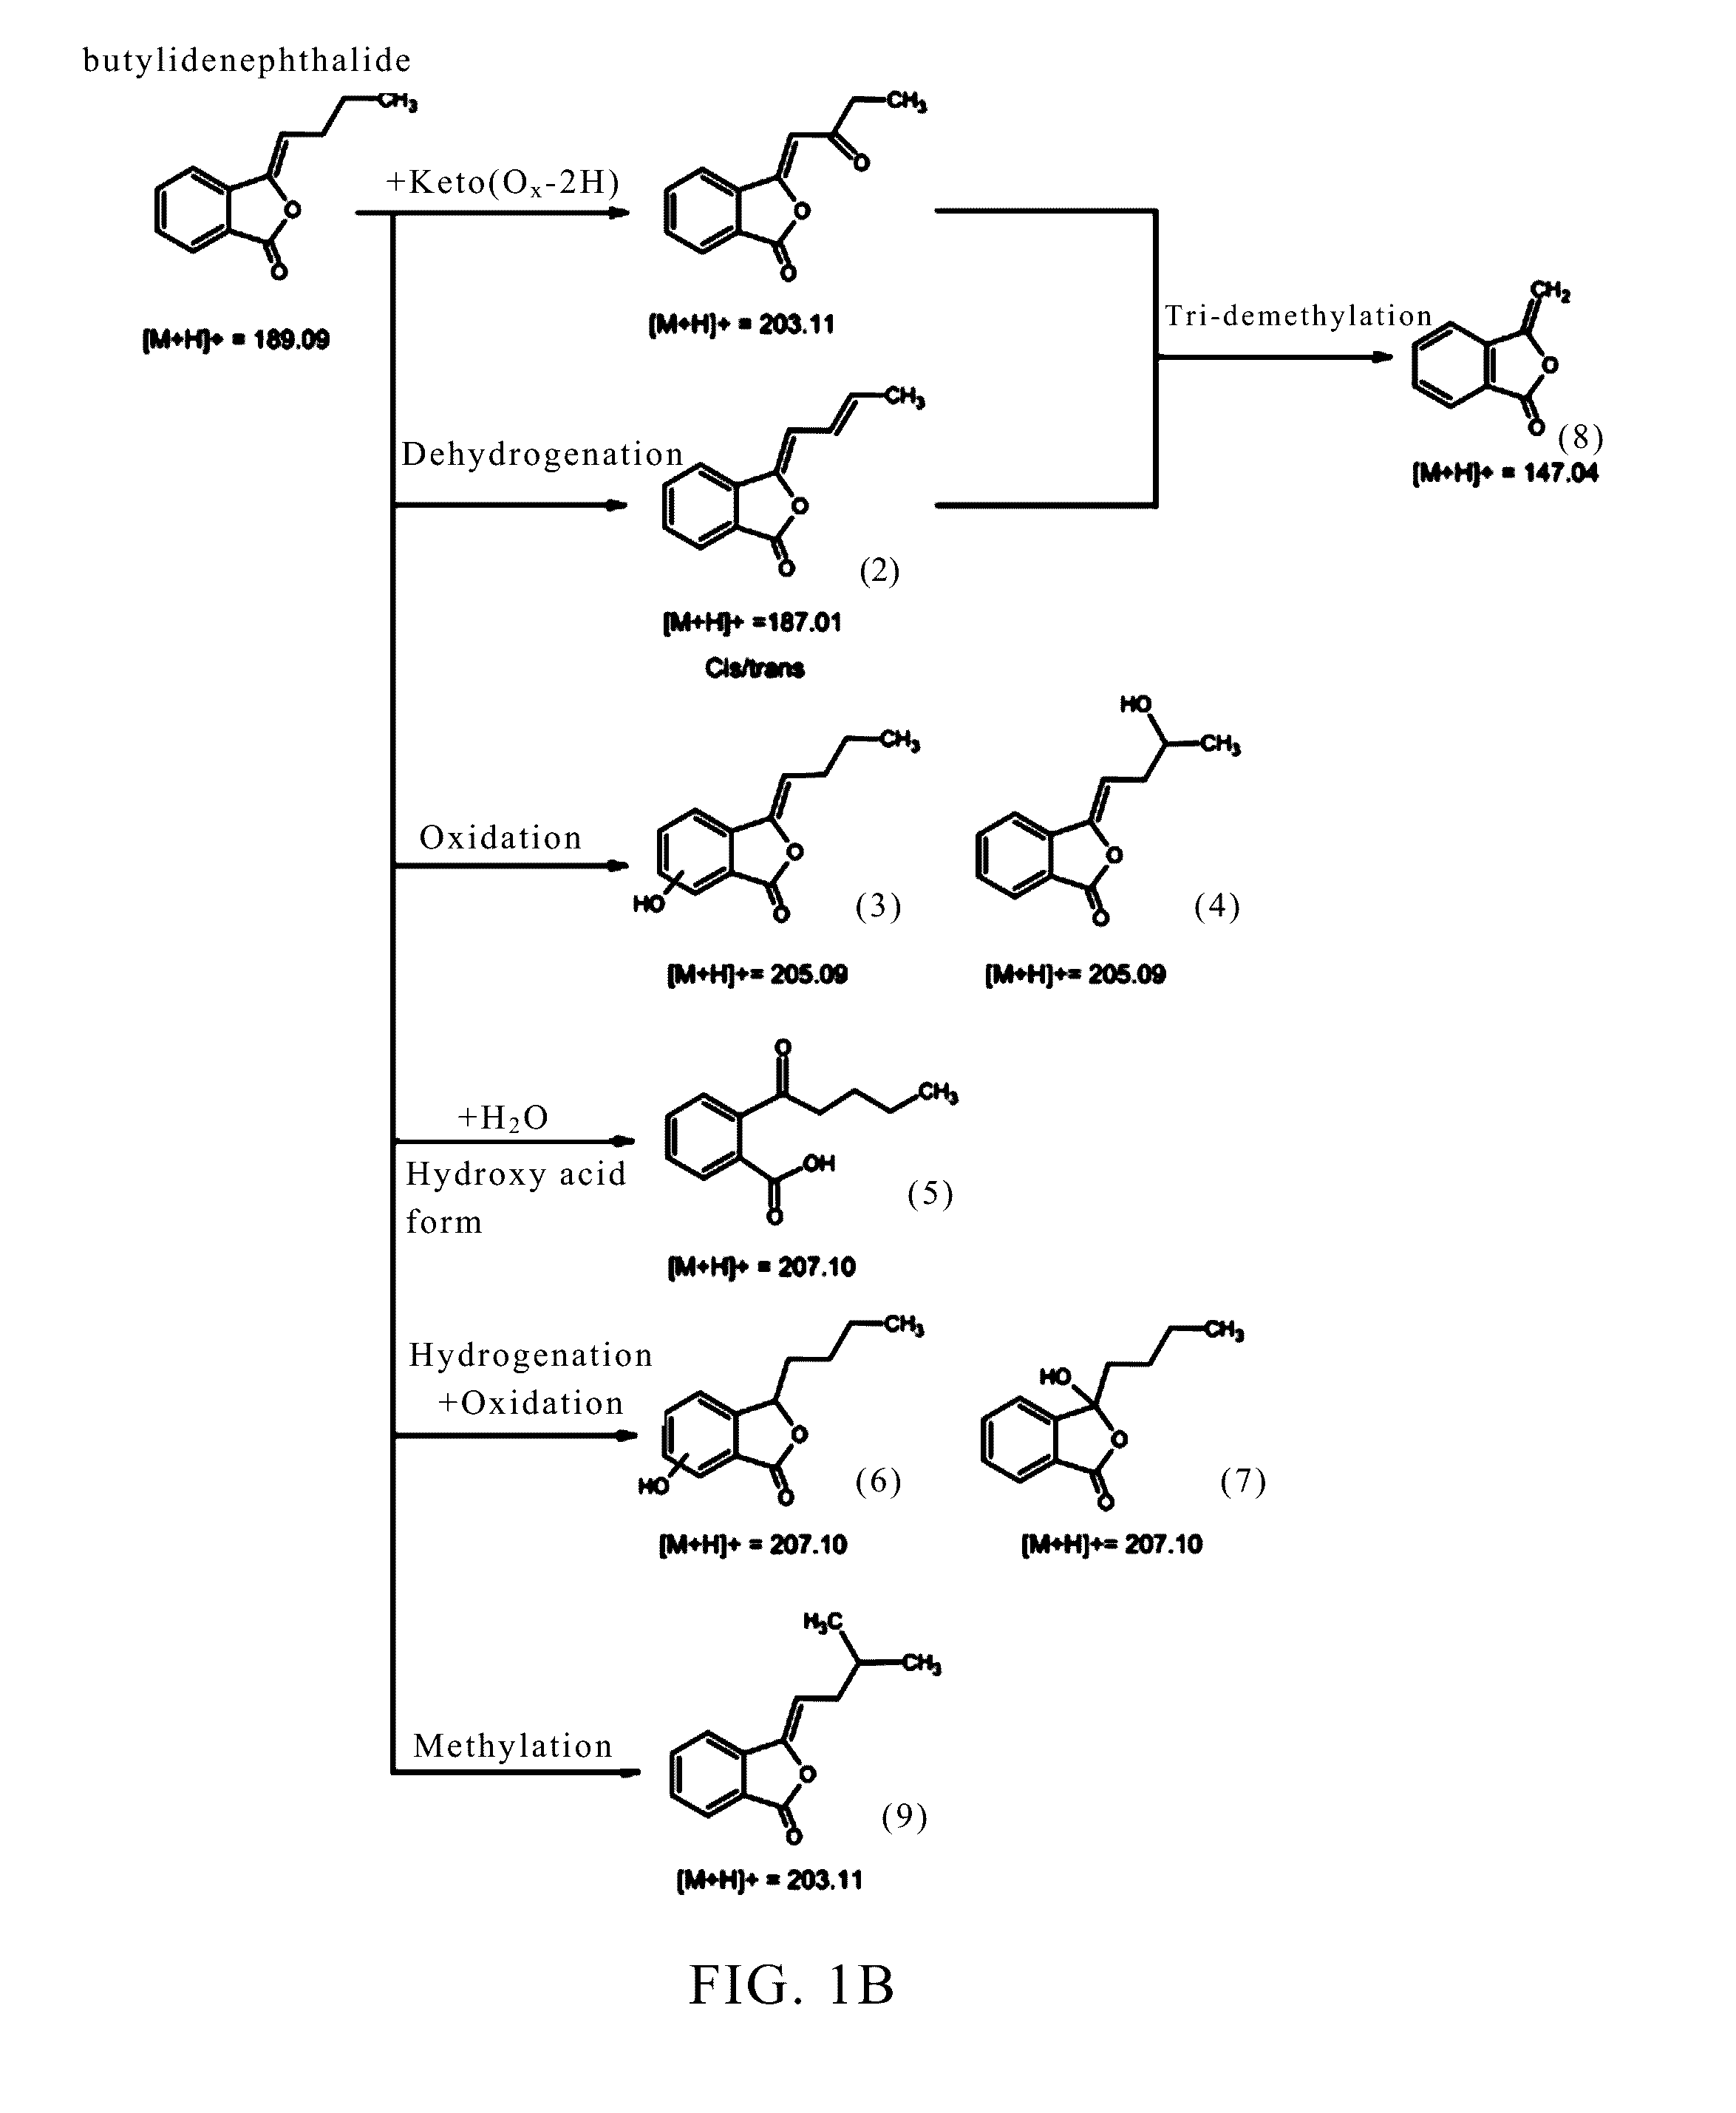 Method for providing an increased expression of telomerase, brain-derived neurotrophic factor, stromal cell-derived factor-1, cxc chemokine receptor 4, and/or immune regulatory factor of stem cell